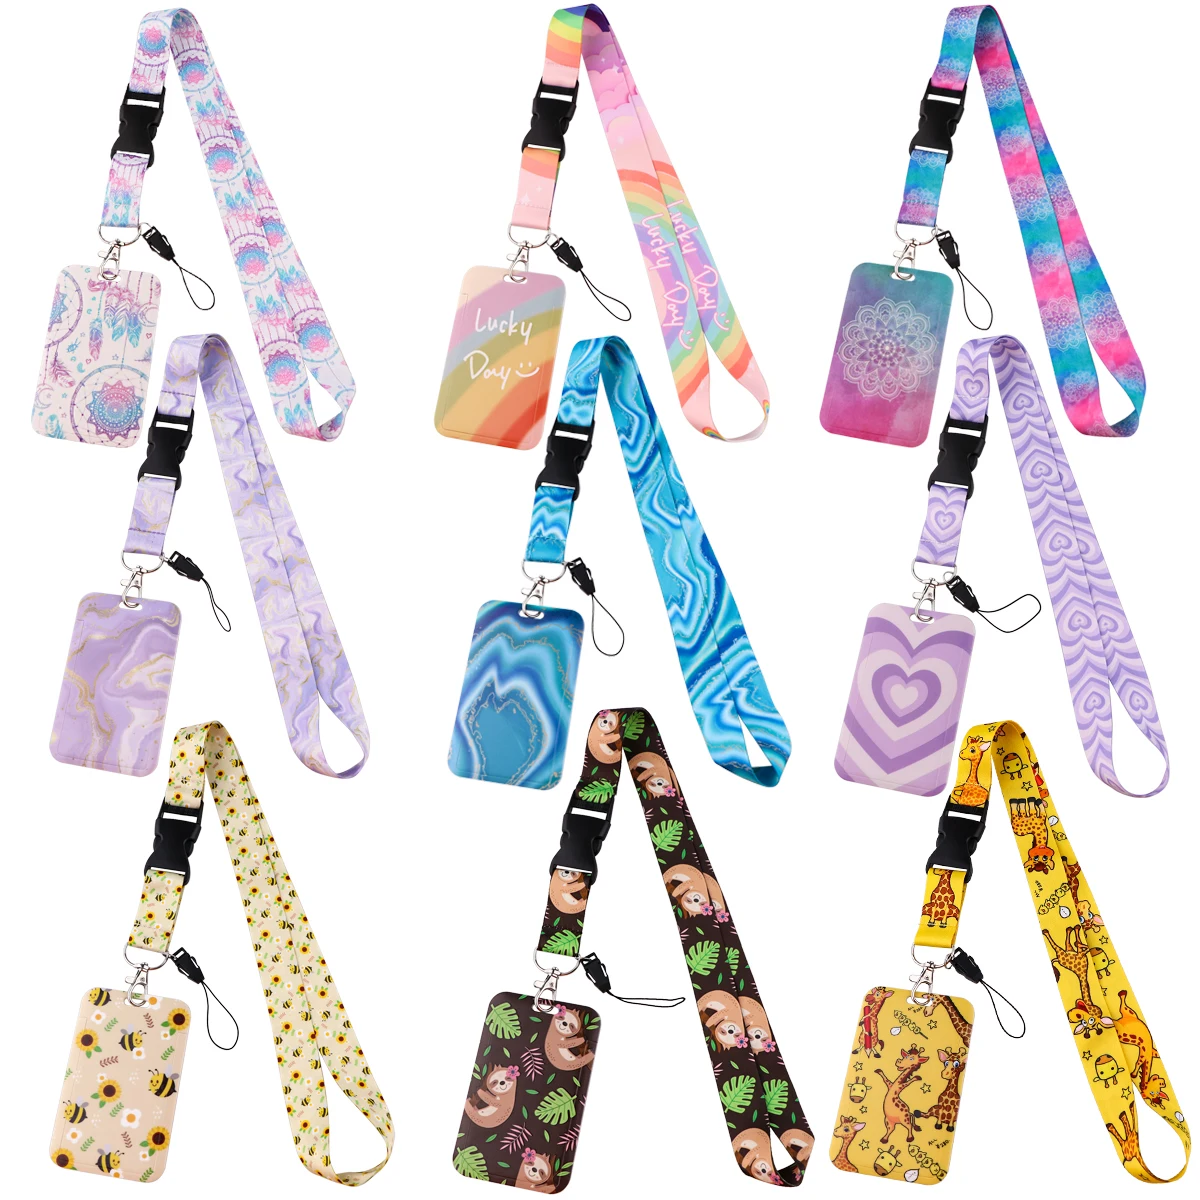 Marble Printing Lanyards for Keys Neck Strap ID Card Gym Cell Phone Straps USB Badge Holder DIY Hang Rope Neckband Accessories ransitute r1992 autism awareness jigsaw neck strap lanyard for keys id card gym phone straps usb badge holder diy hang rope